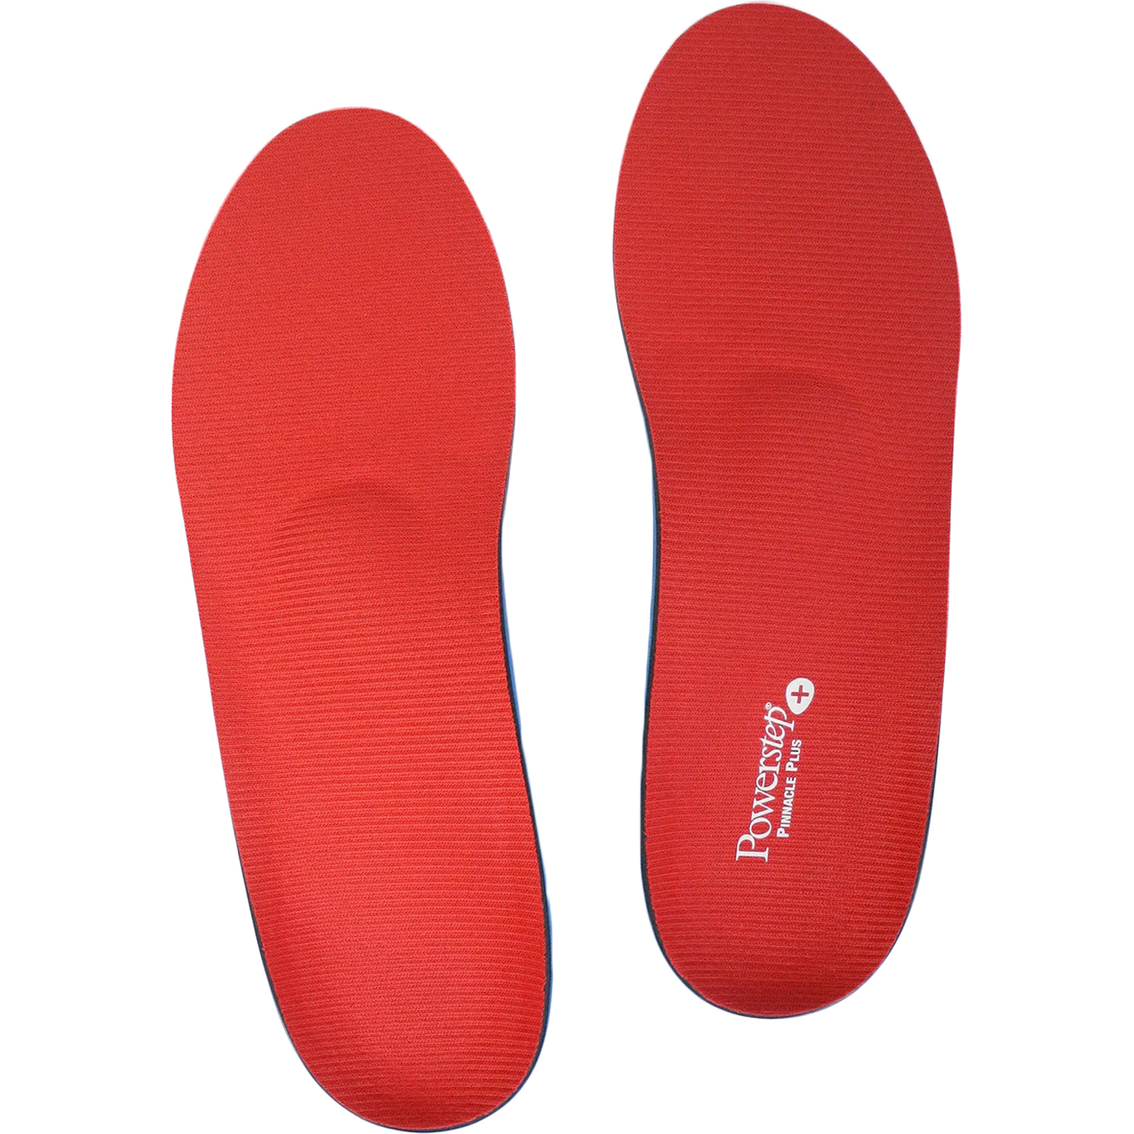 Powerstep Pinnacle Plus Full Length Orthotic Insoles with Metatarsal Support - Image 2 of 10